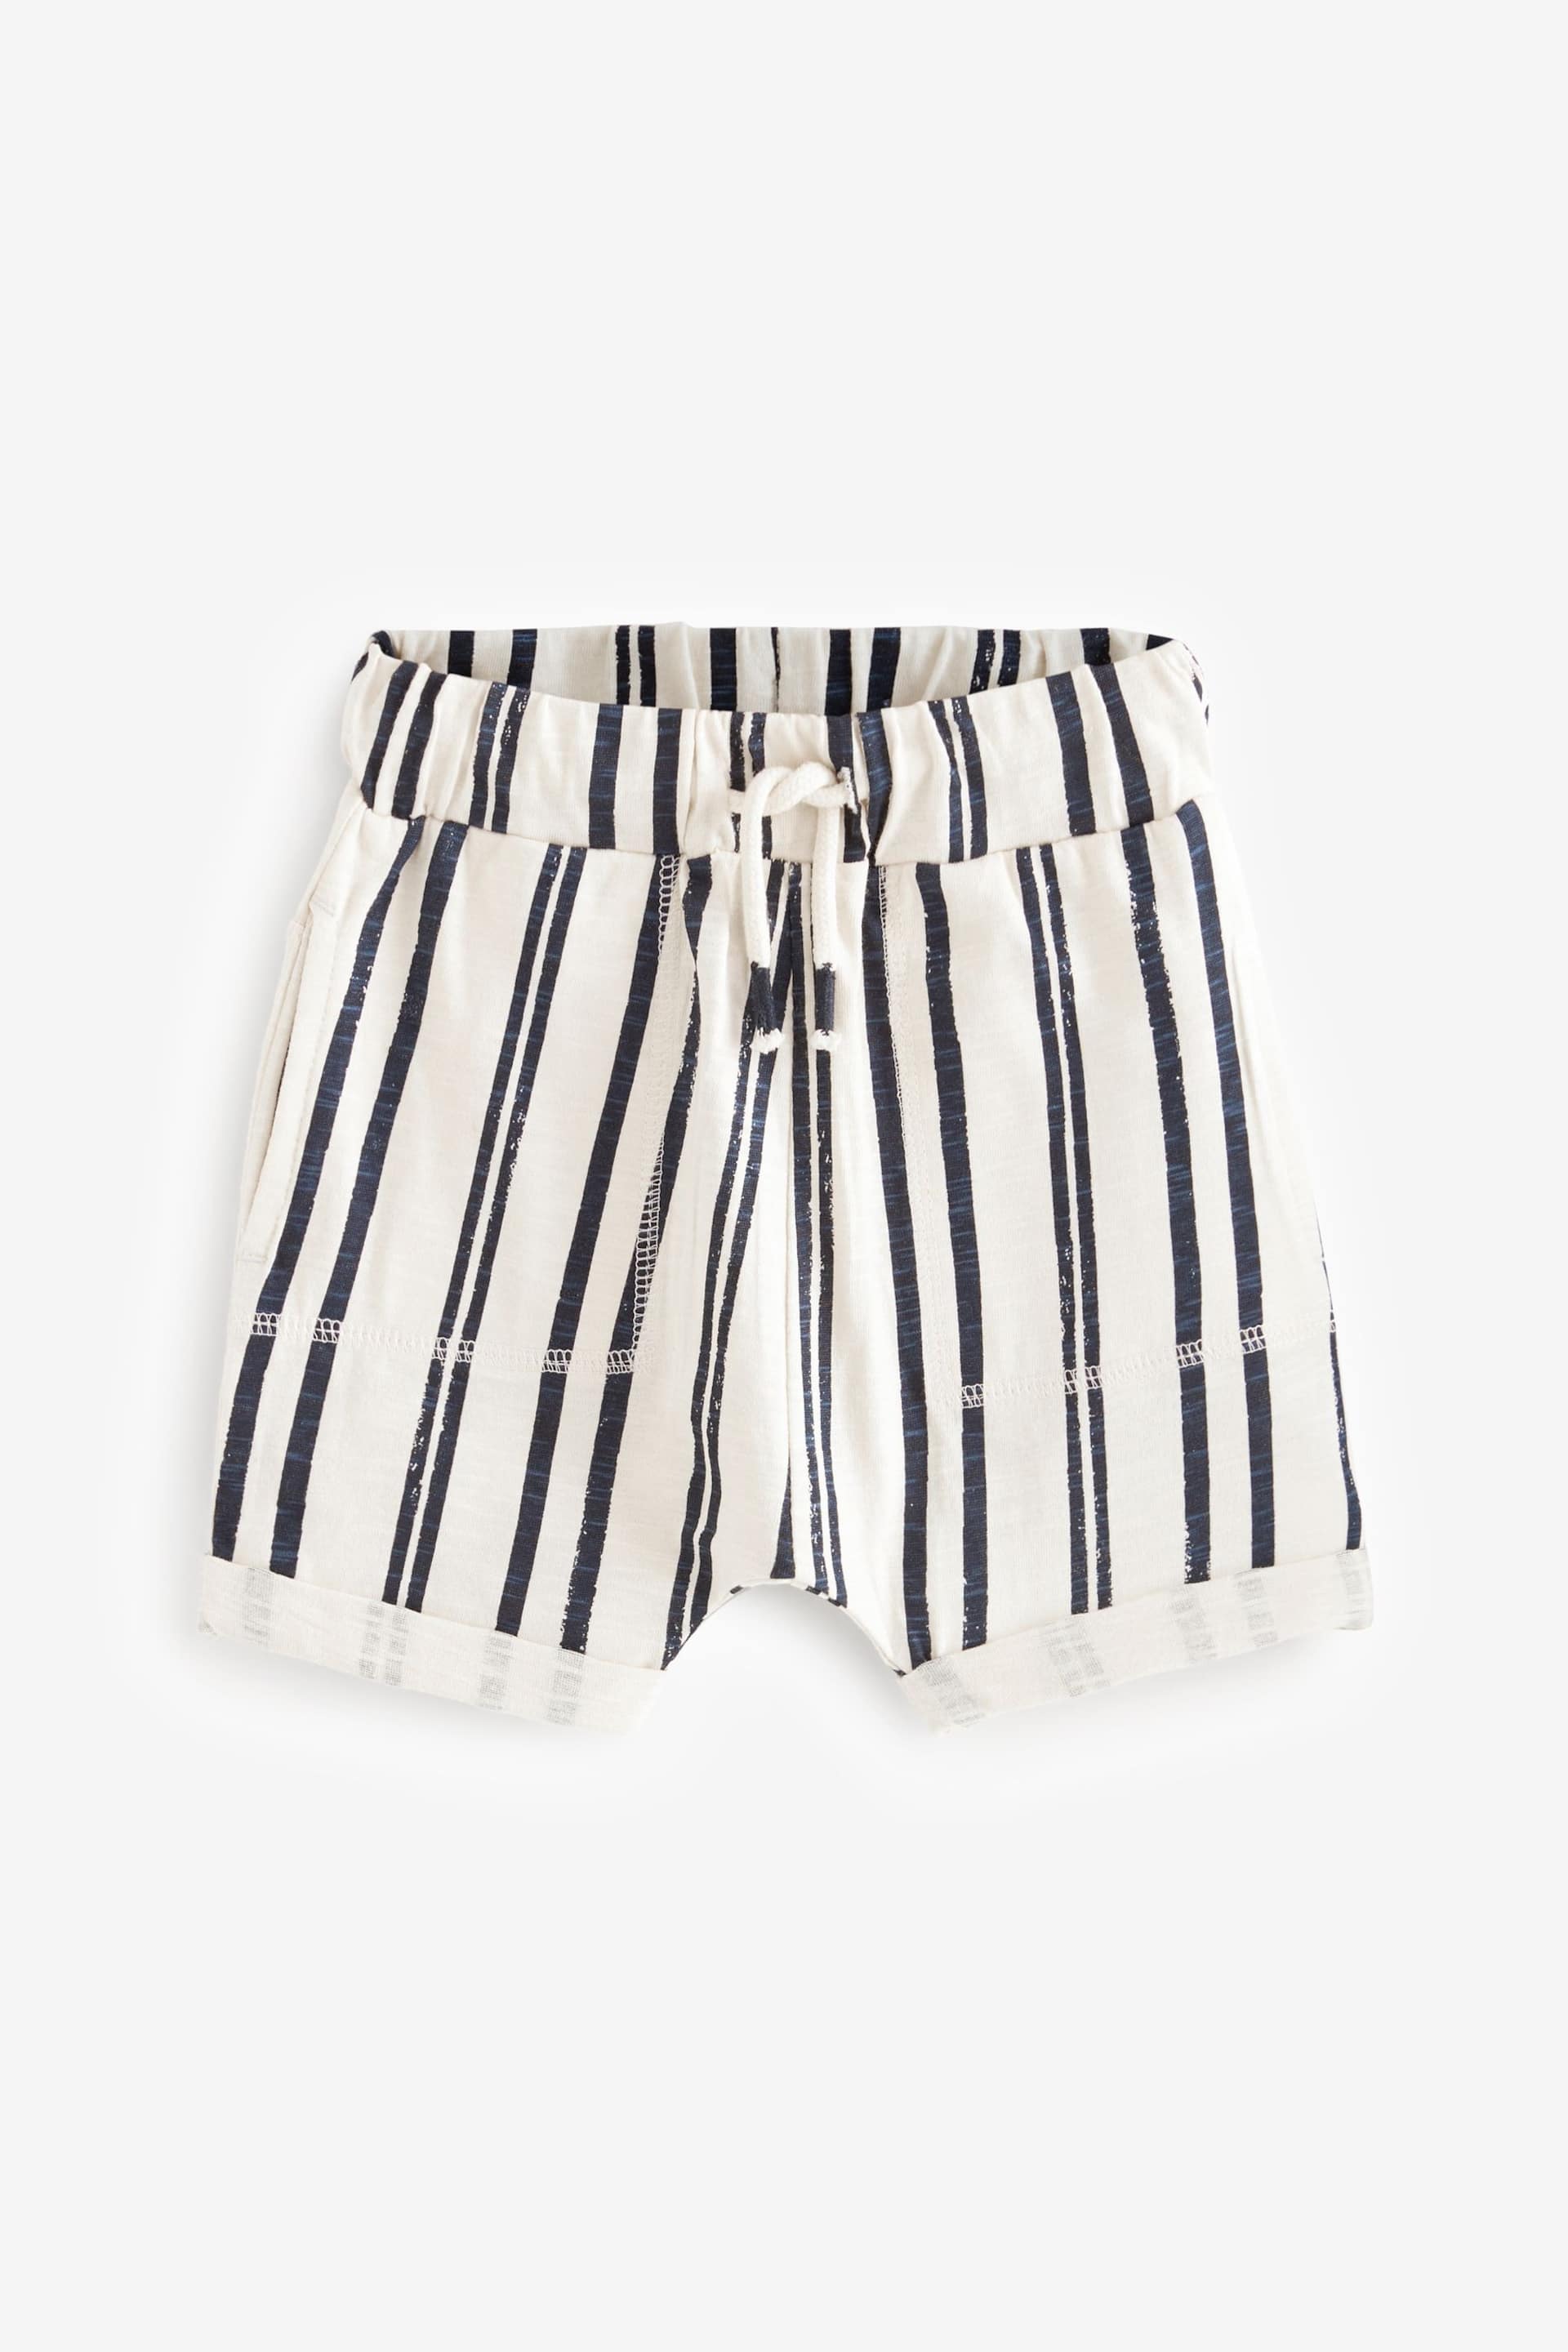 Ochre Yellow Stripe All Over Print Lightweight Jersey Shorts 3 Pack (3mths-7yrs) - Image 2 of 6